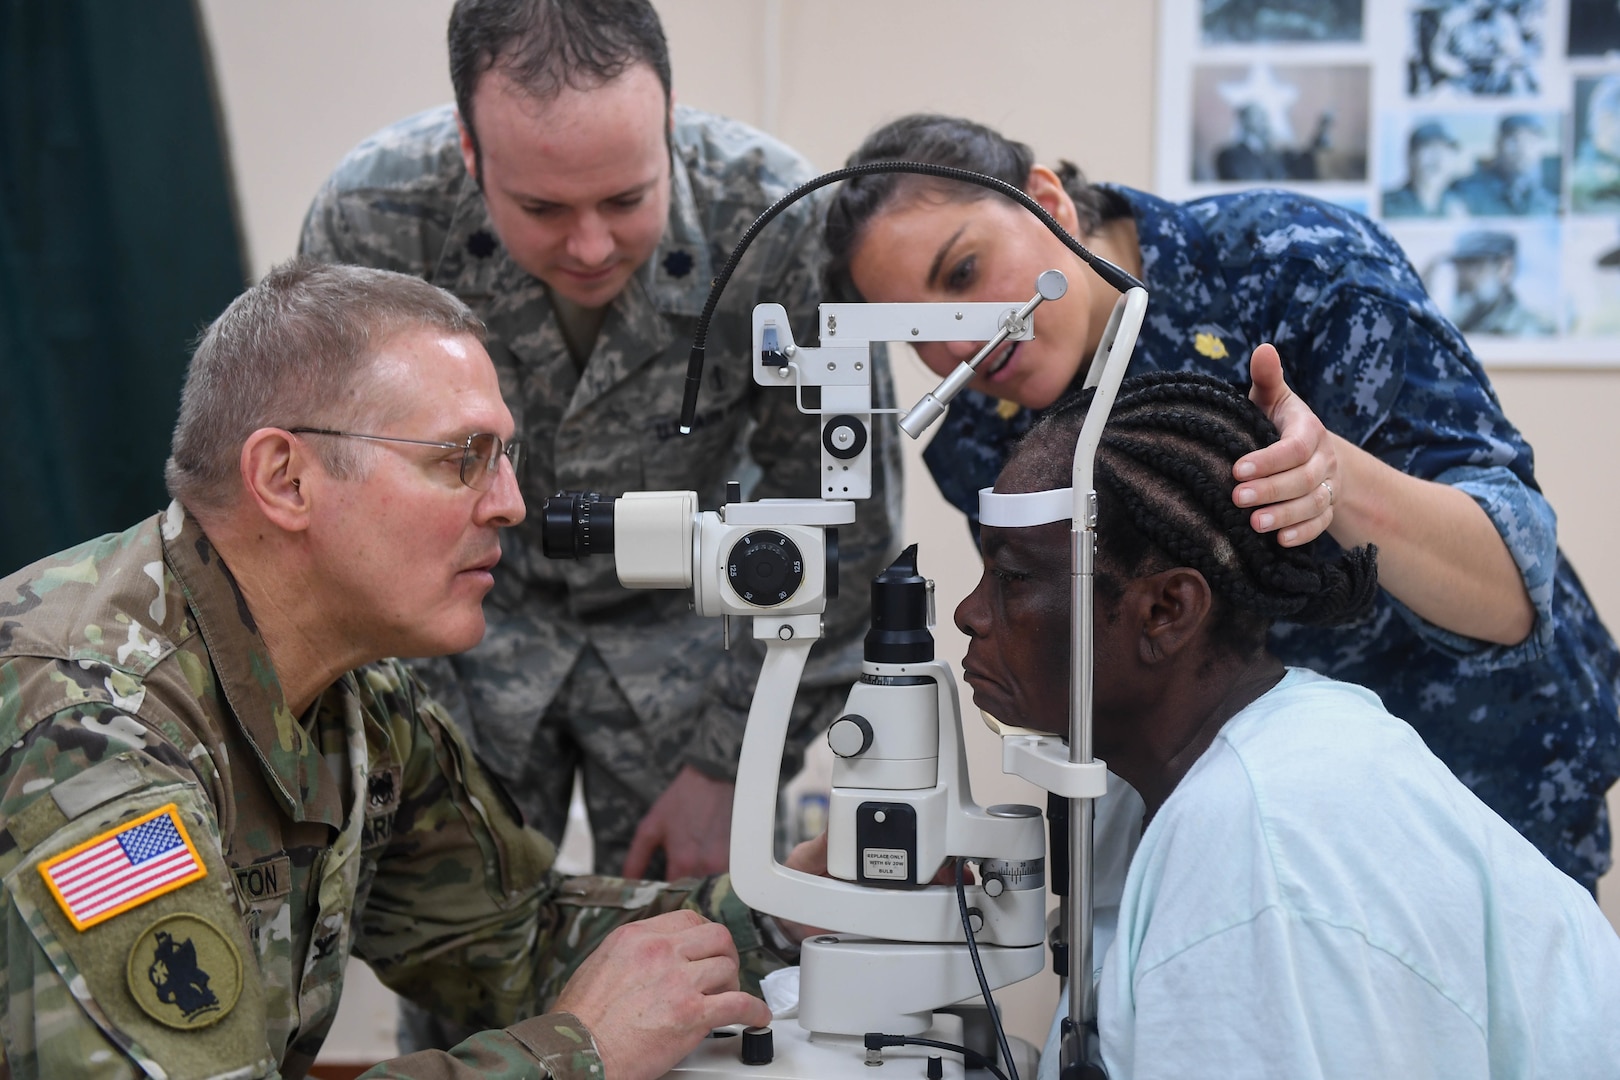 U.S. service members perform postoperative checks on the last ophthalmology center patient during New Horizons exercise 2019 at Port Mourant, Guyana, May 16, 2019. The ophthalmology clinic was established to provide aid to the Guyanese population by screening and selecting patients to receive cataract surgery in support of New Horizons 2019. The New Horizons exercise 2019 provides U.S. military members an opportunity to train for an overseas deployment and the logistical requirements it entails. The exercise promotes bilateral cooperation by providing opportunities for U.S. and partner nation military engineers, medical personnel and support staff to work and train side by side.